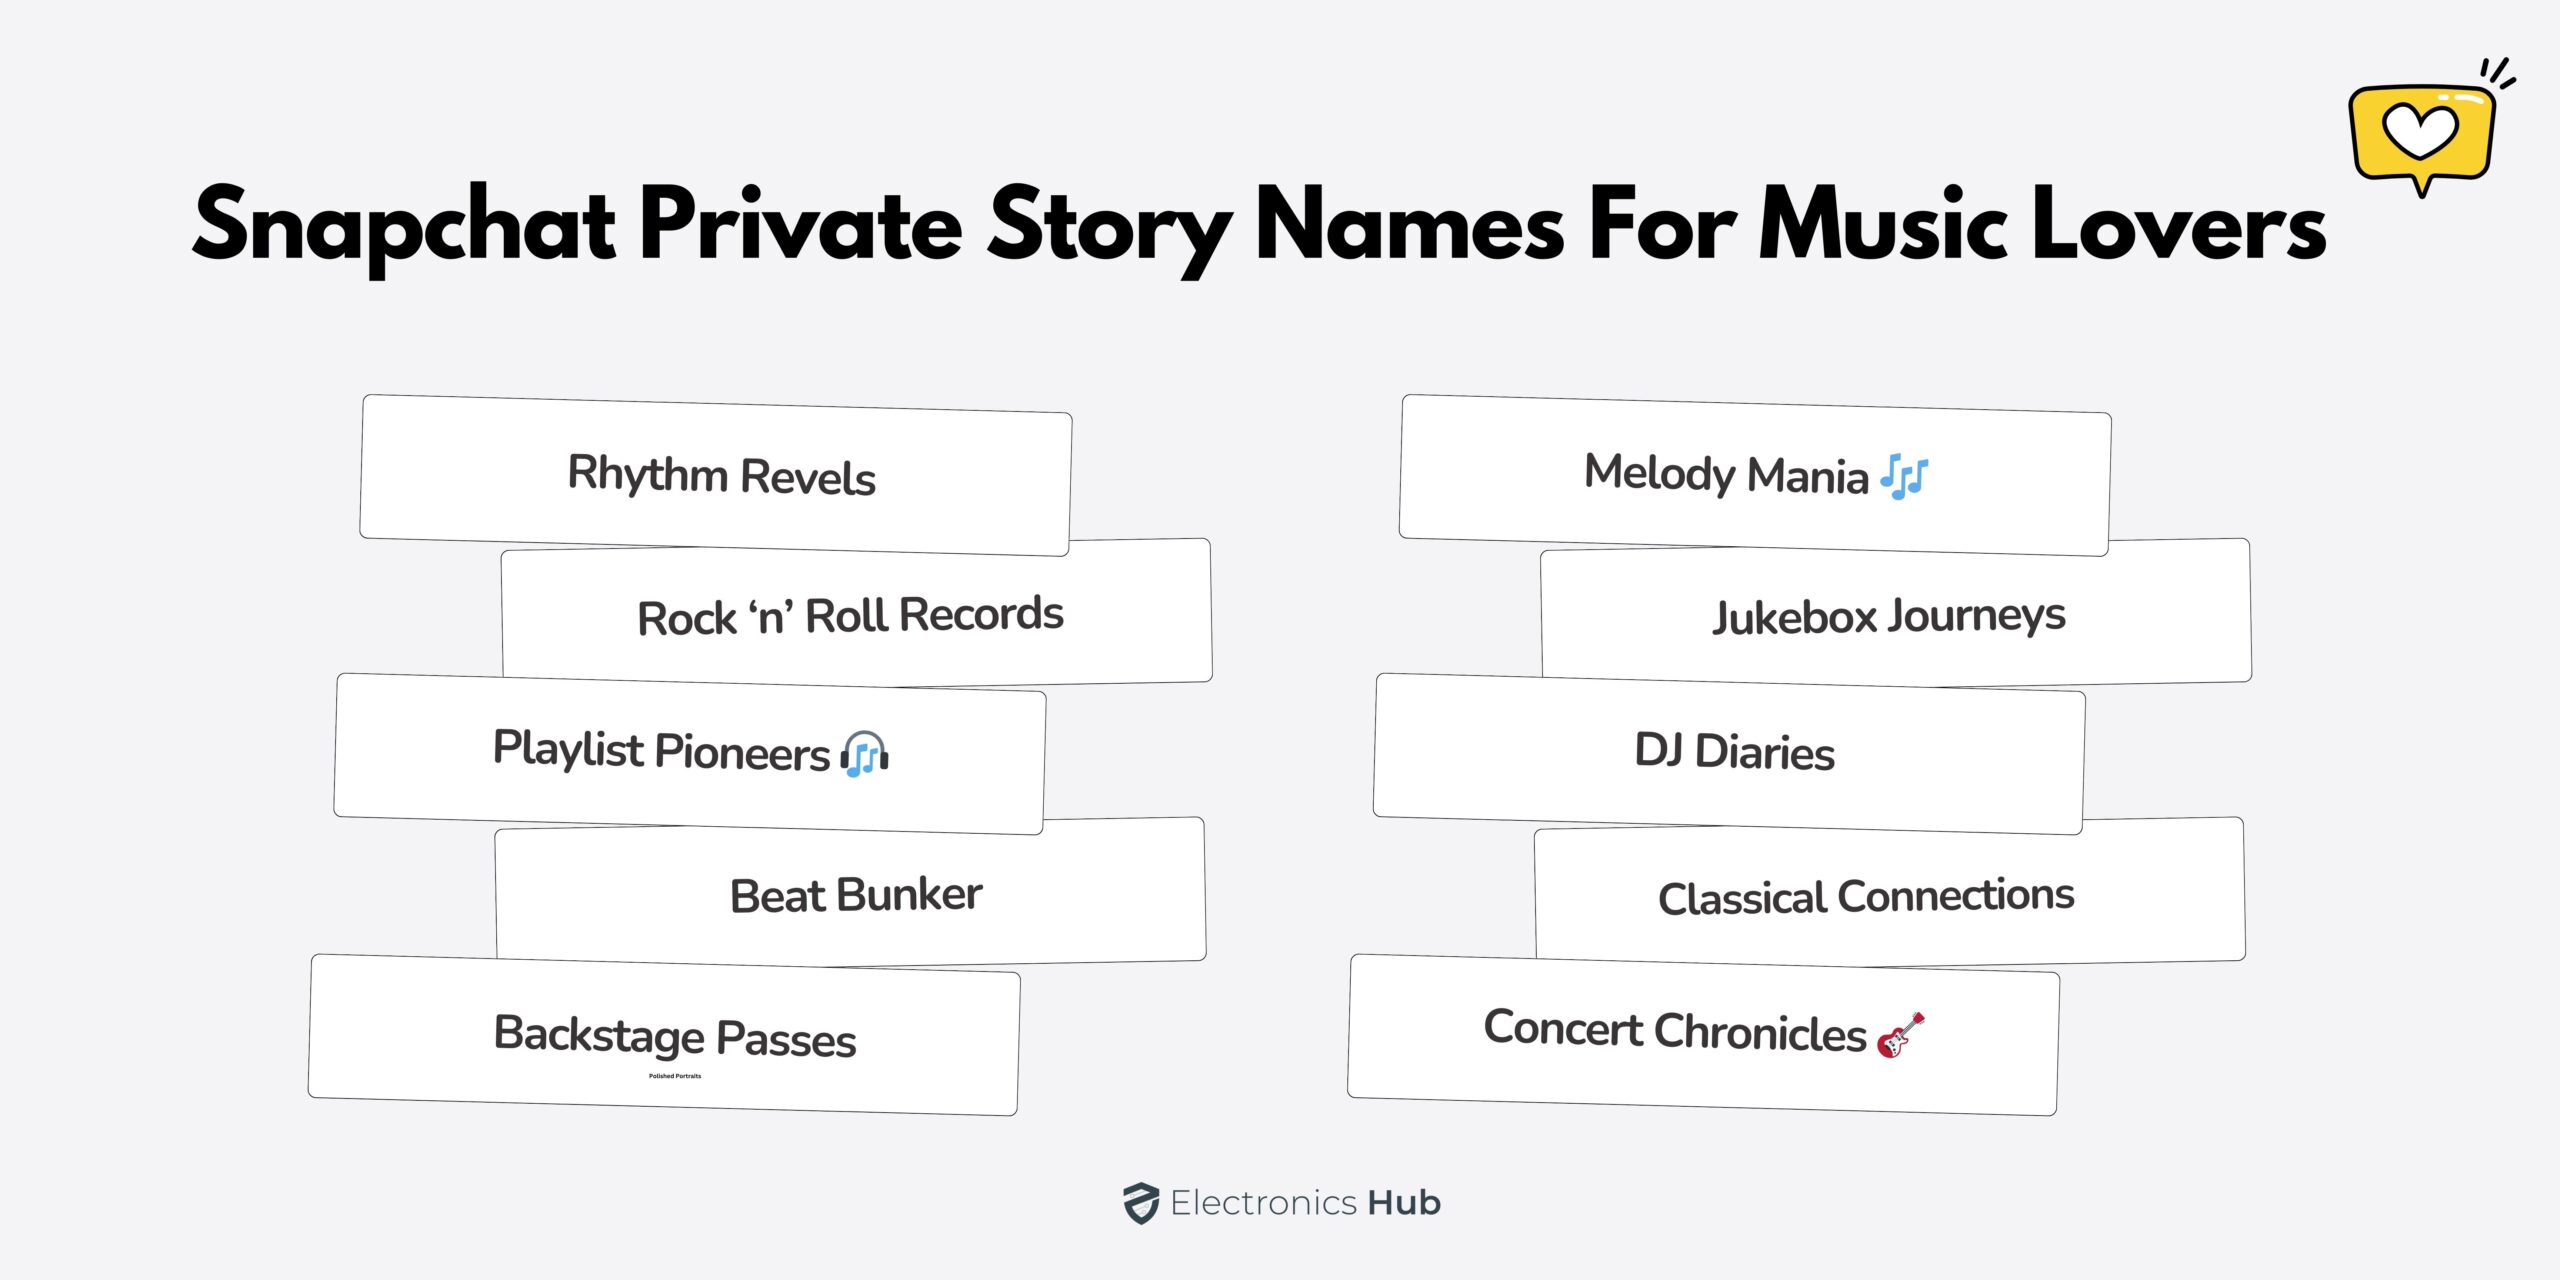 Snapchat Private Story Names for Music Lovers